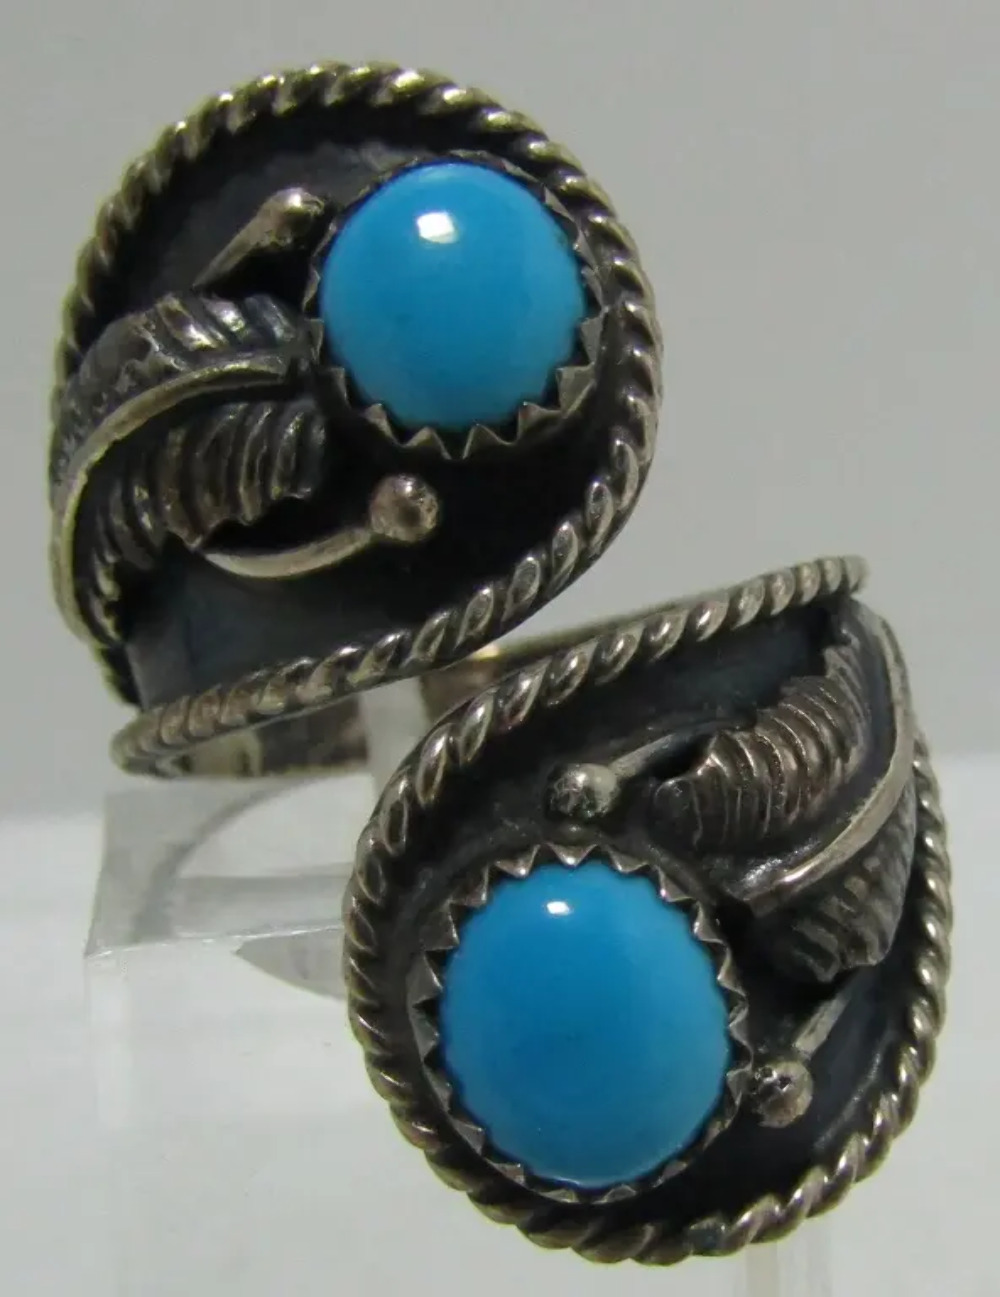 SLEEPING BEAUTY TURQUOISE RING STERLING SILVER